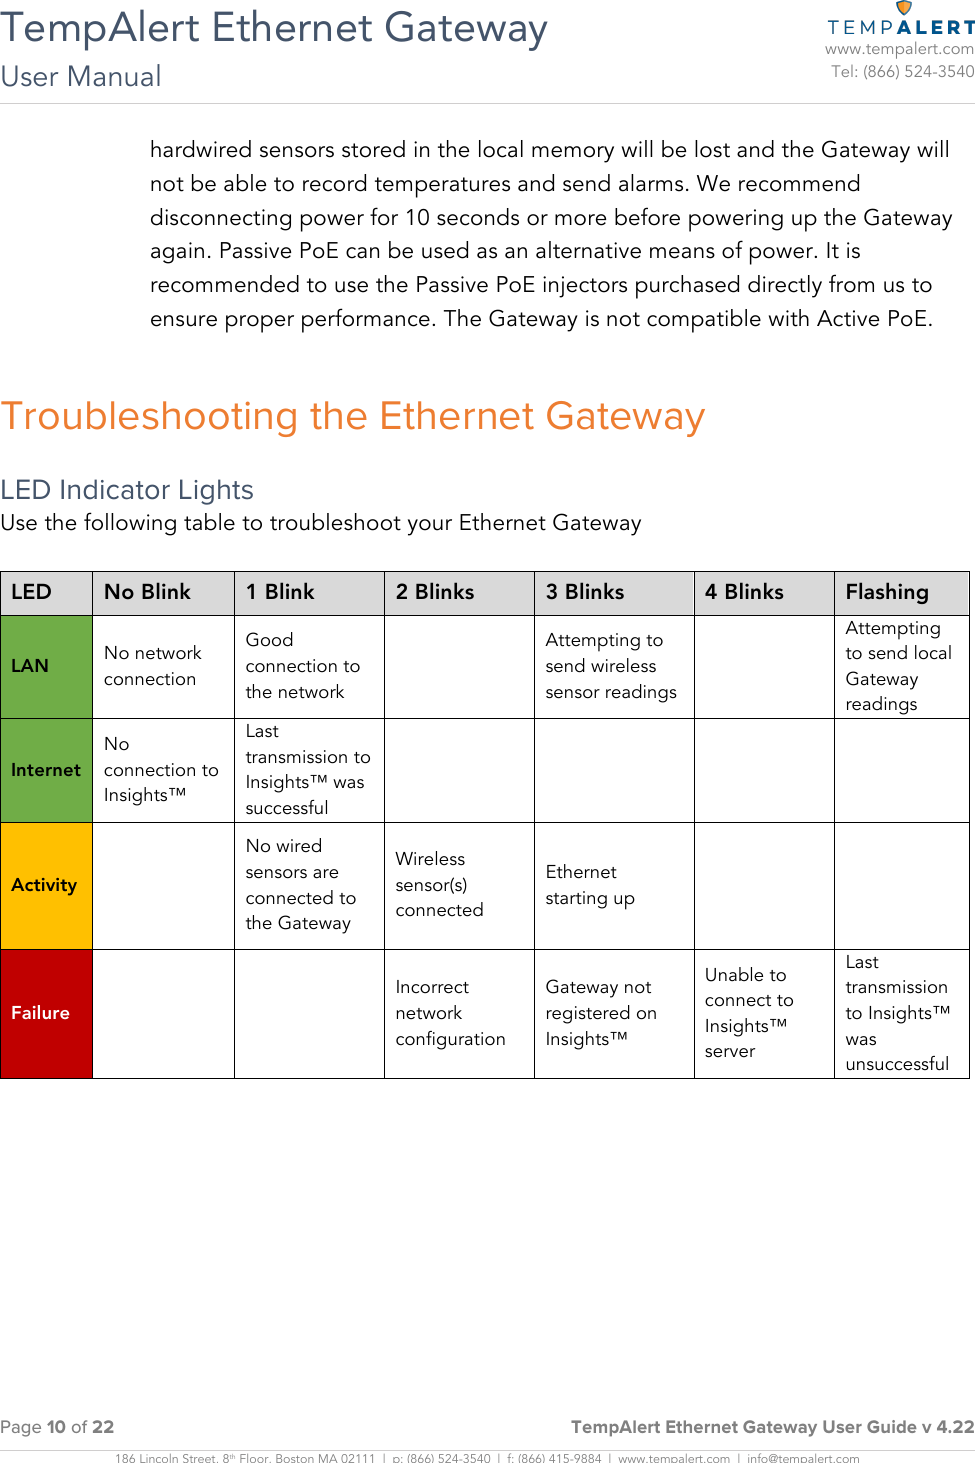 TempAlert Ethernet Gateway User Manual   www.tempalert.com Tel: (866) 524-3540  Page 10 of 22     TempAlert Ethernet Gateway User Guide v 4.22  186 Lincoln Street, 8th Floor, Boston MA 02111  |  p: (866) 524-3540  |  f: (866) 415-9884  |  www.tempalert.com  |  info@tempalert.com    hardwired sensors stored in the local memory will be lost and the Gateway will not be able to record temperatures and send alarms. We recommend disconnecting power for 10 seconds or more before powering up the Gateway again. Passive PoE can be used as an alternative means of power. It is recommended to use the Passive PoE injectors purchased directly from us to ensure proper performance. The Gateway is not compatible with Active PoE.  Troubleshooting the Ethernet Gateway  LED Indicator Lights Use the following table to troubleshoot your Ethernet Gateway  LED No Blink 1 Blink 2 Blinks 3 Blinks 4 Blinks Flashing LAN No network connection Good connection to the network  Attempting to send wireless sensor readings   Attempting to send local Gateway readings Internet No connection to Insights™ Last transmission to Insights™ was successful         Activity   No wired sensors are connected to the Gateway Wireless sensor(s) connected Ethernet starting up     Failure   Incorrect network configuration Gateway not registered on Insights™ Unable to connect to Insights™ server Last transmission to Insights™ was unsuccessful 